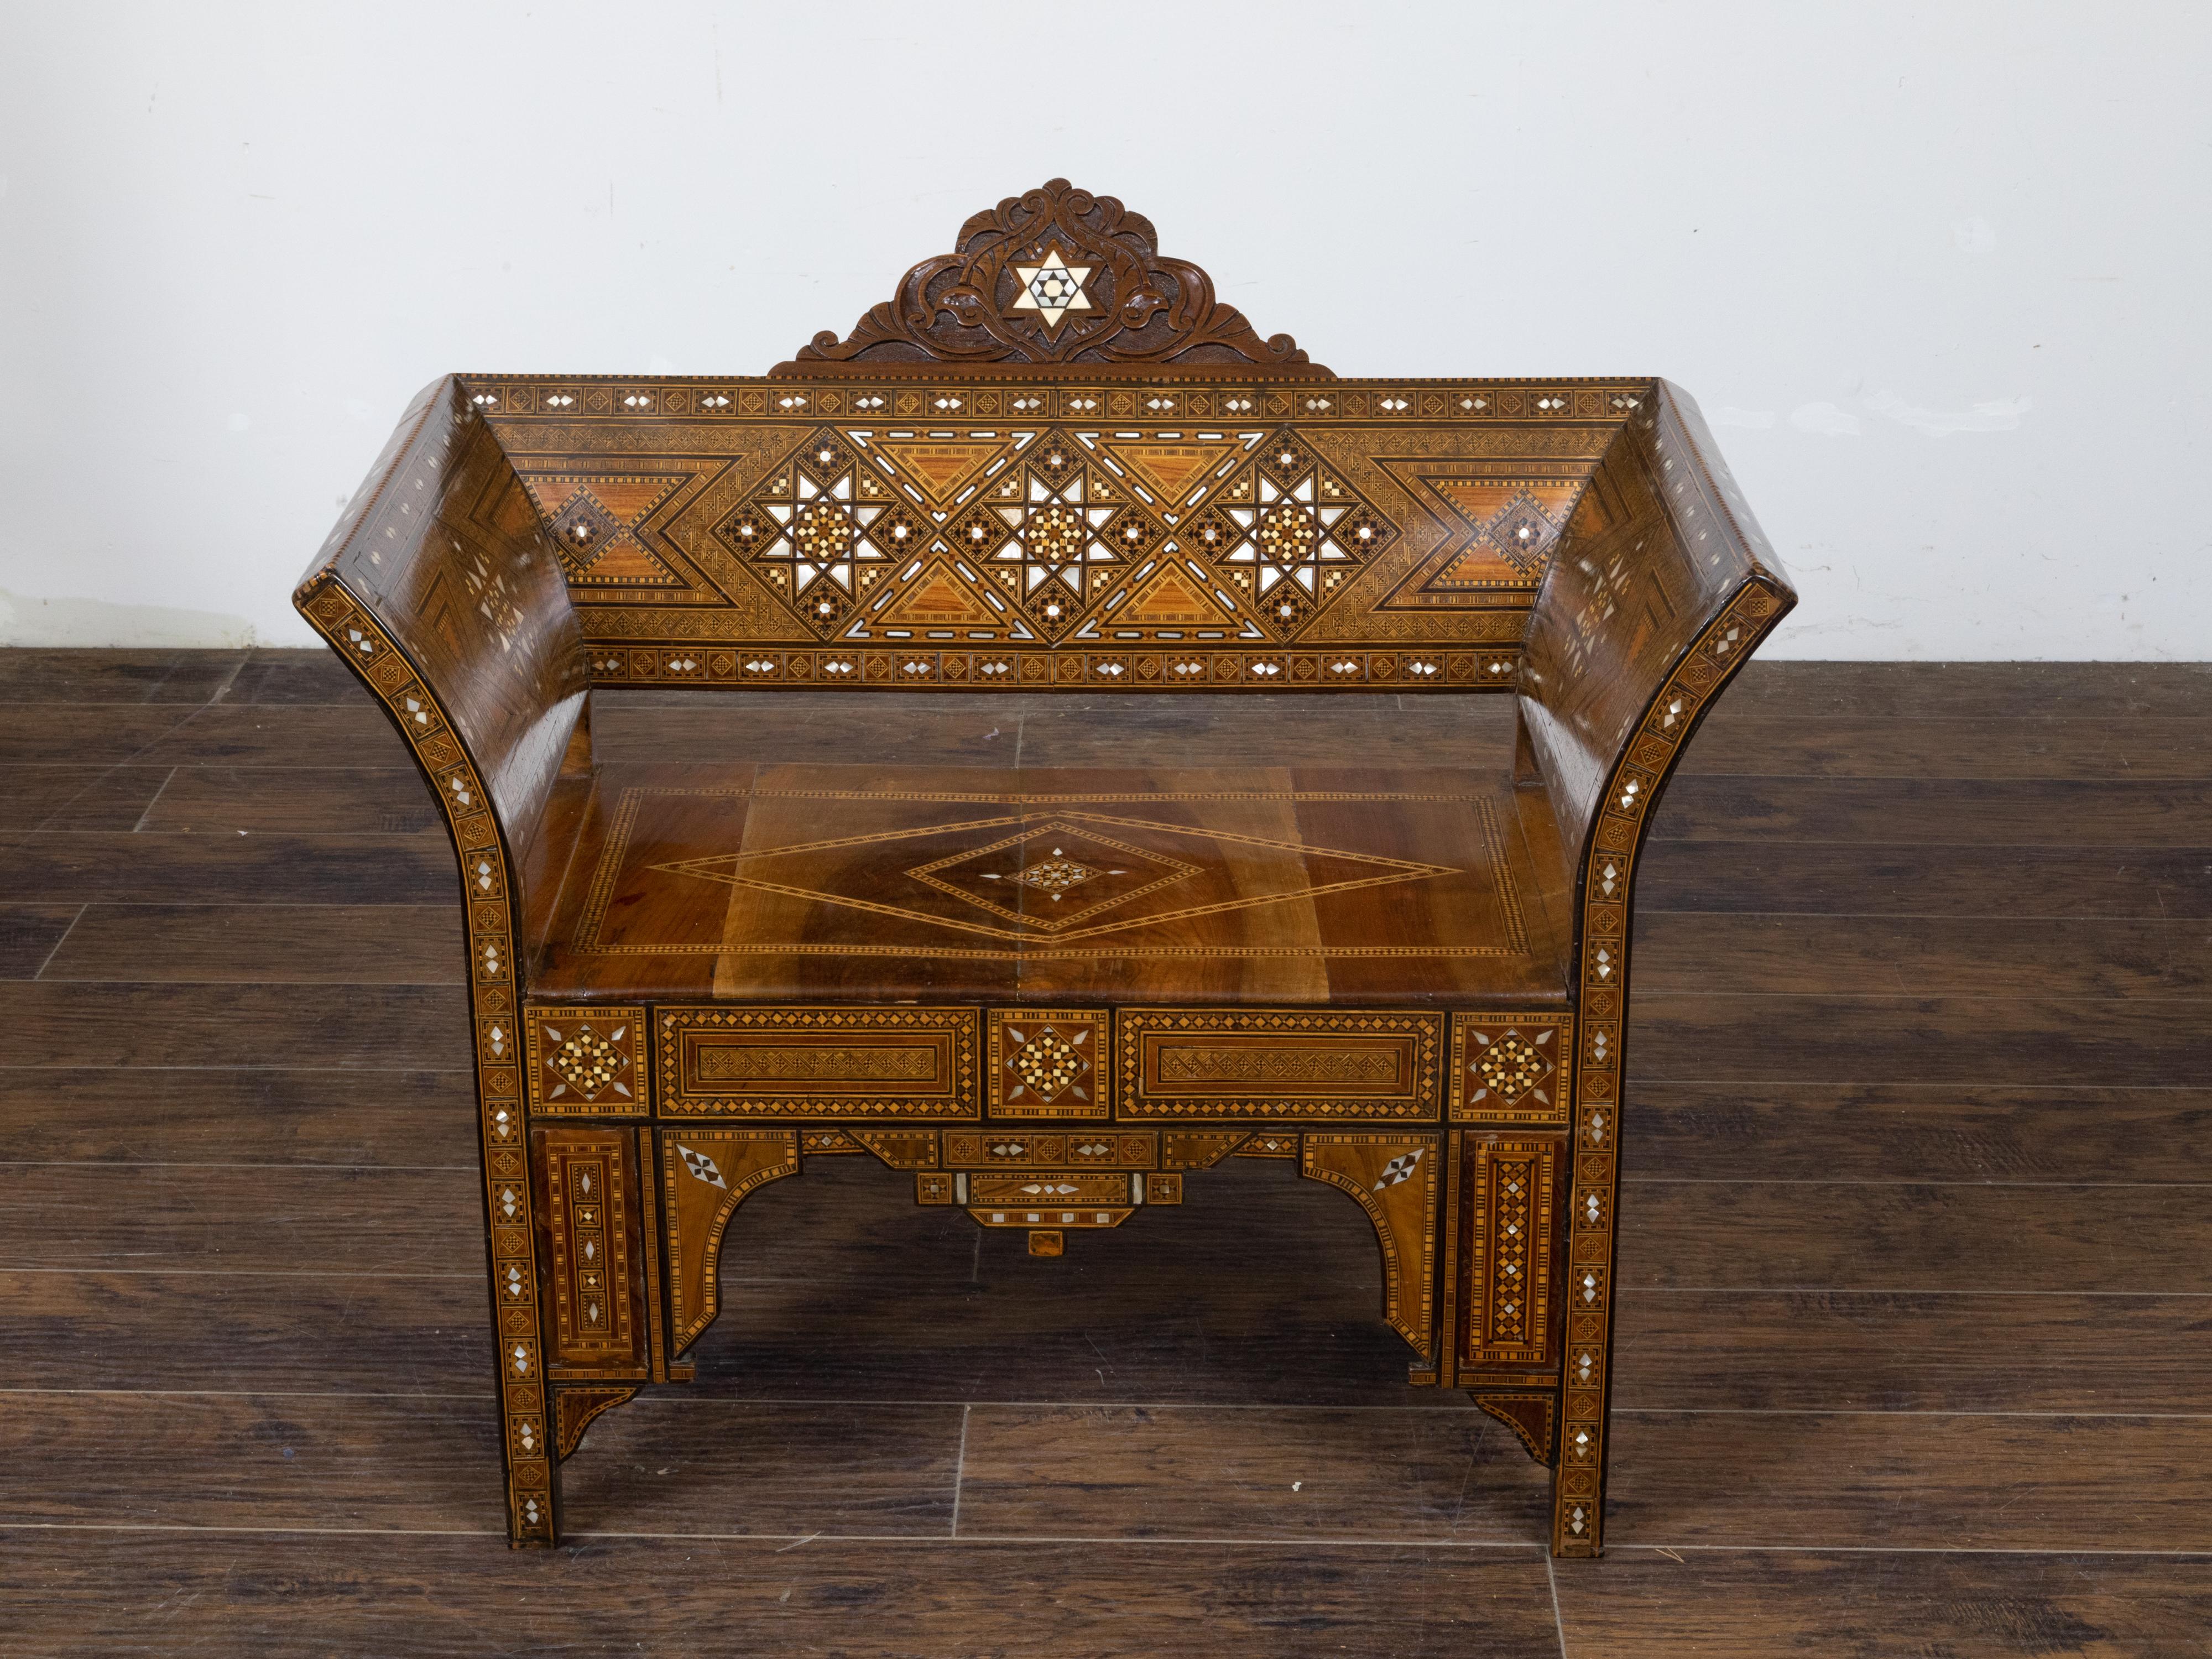 This Moorish style Moroccan armchair, dating back to circa 1900, will instantly enchant the viewer with its out-curving back and arms, intricate geometric inlay, mother of pearl motifs, and gracefully carved legs. The armchair embodies the essence